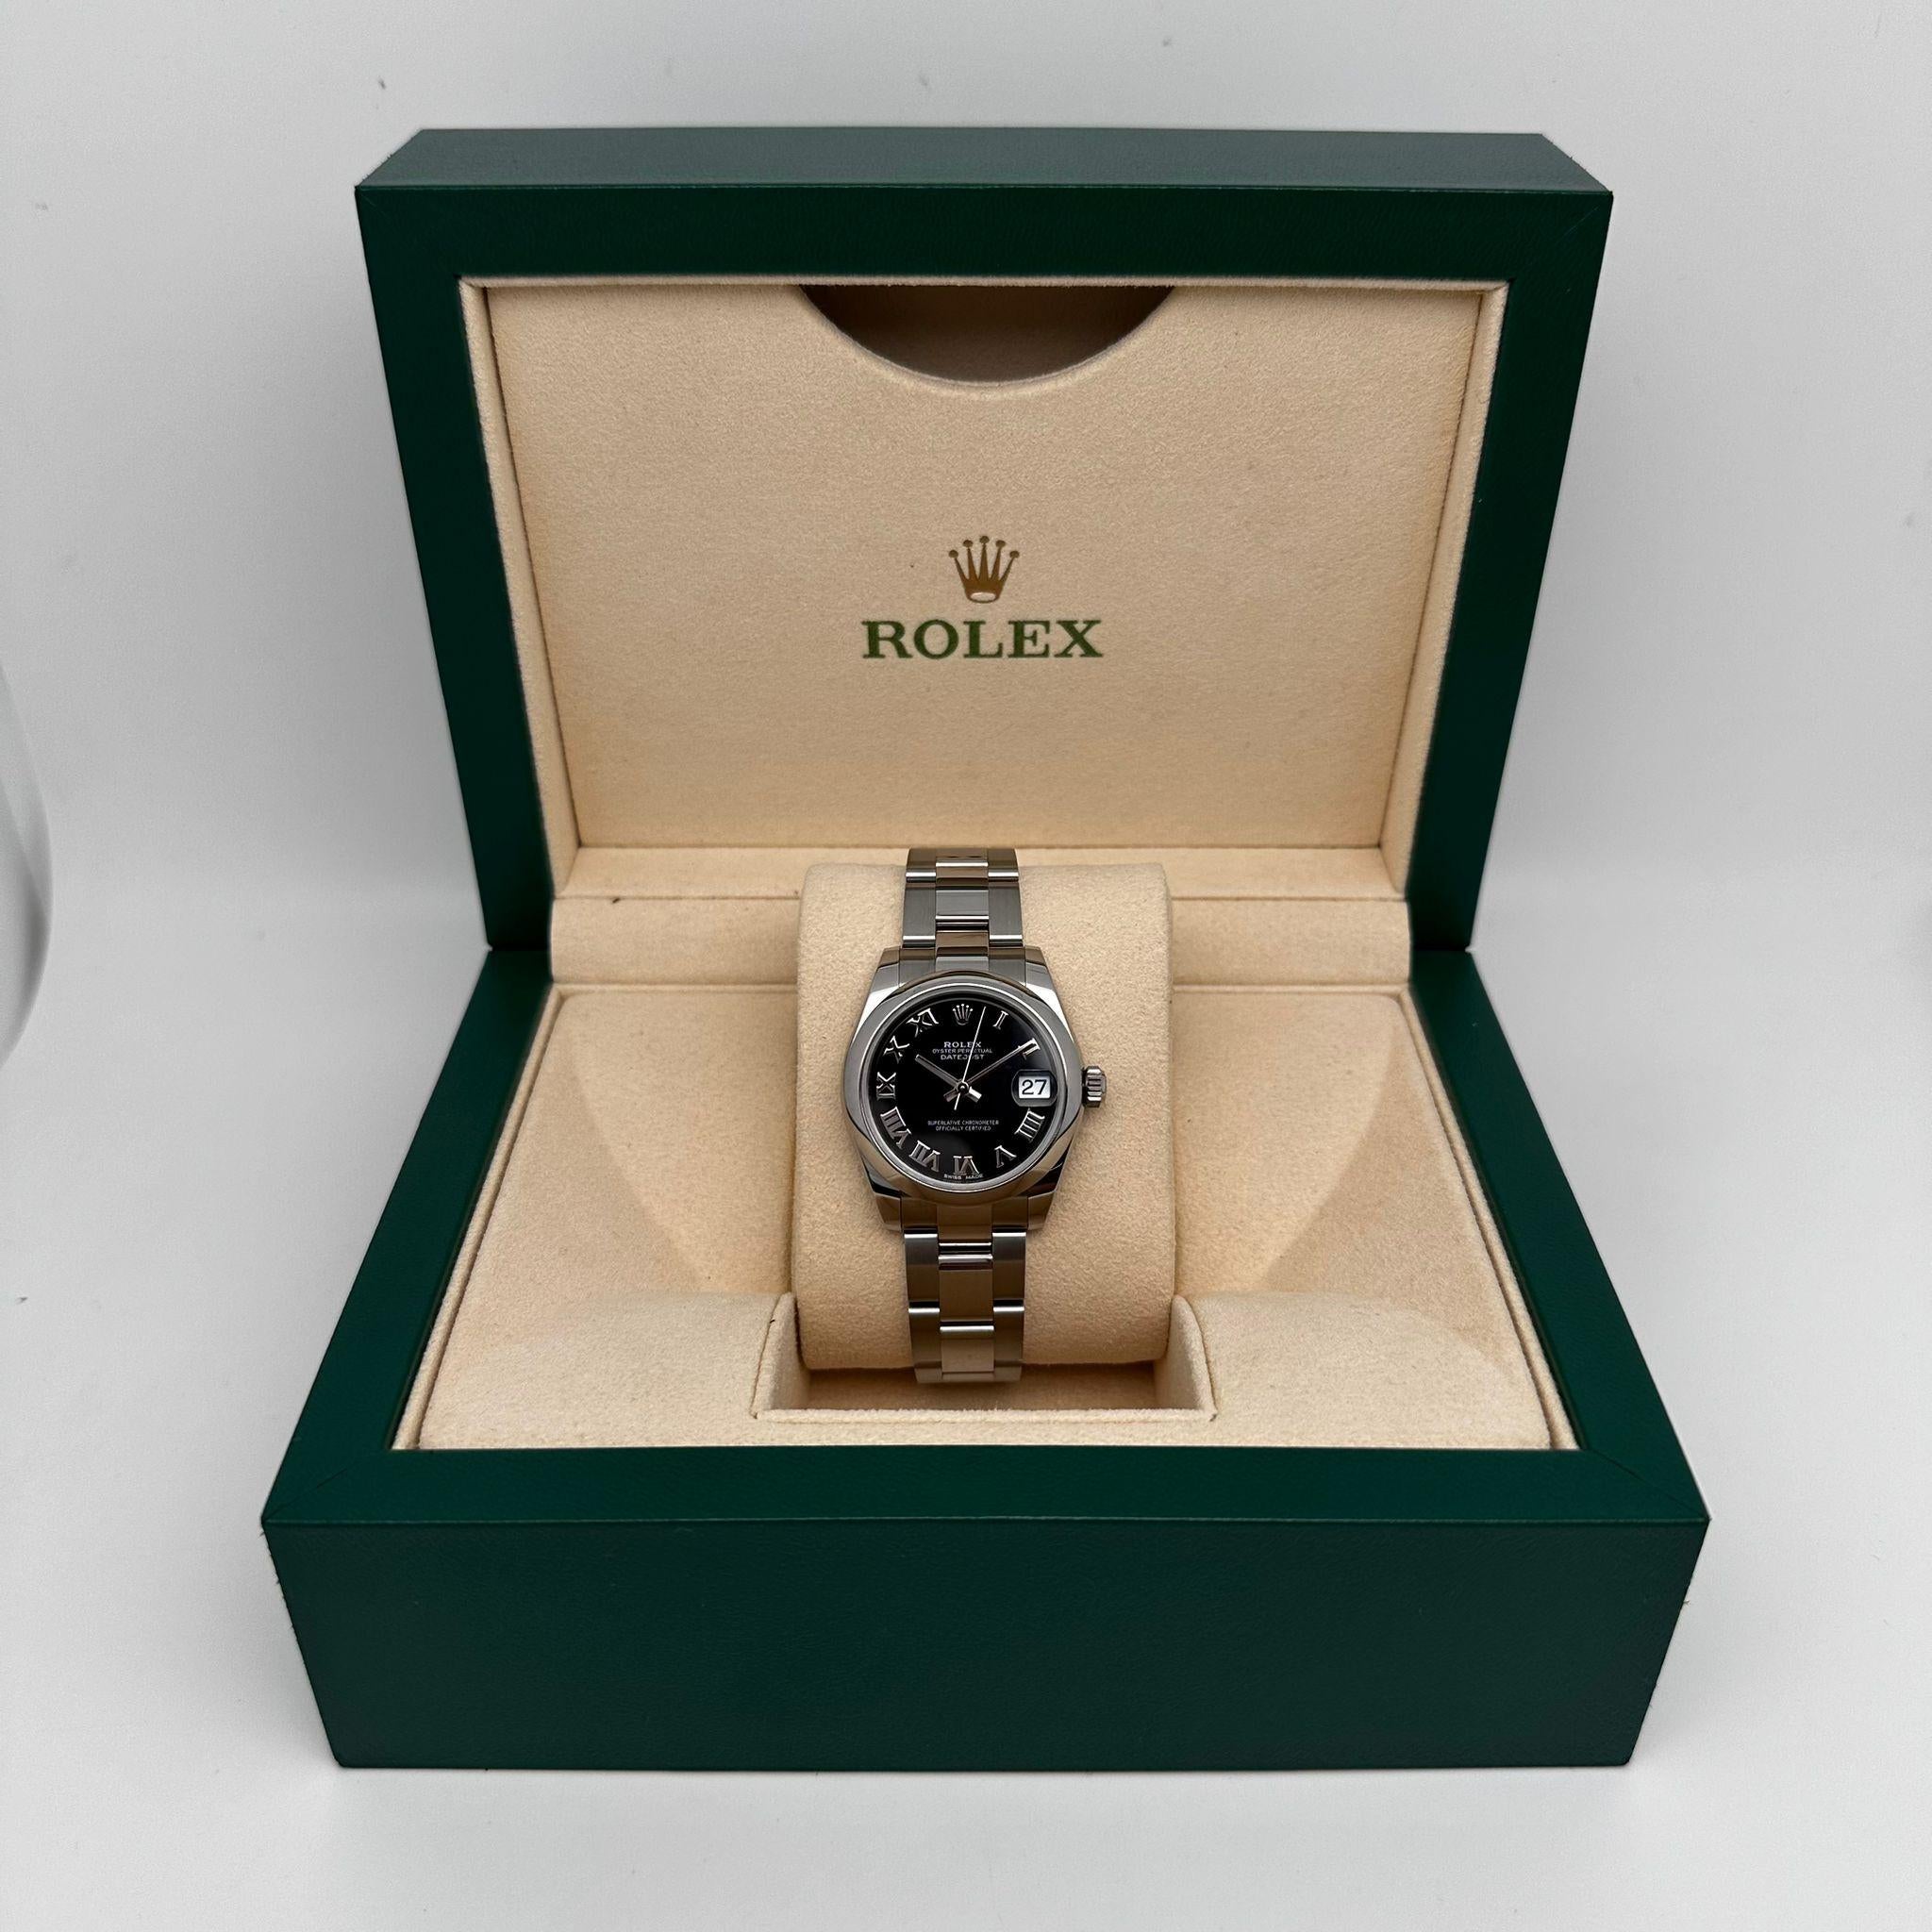 Pre-owned in good condition. Comes with original box but no papers.

* Free Shipping within the USA
* Two-year warranty coverage
* 14-day return policy with a full refund. Buyers can verify the watch's authenticity at any boutique or dealership